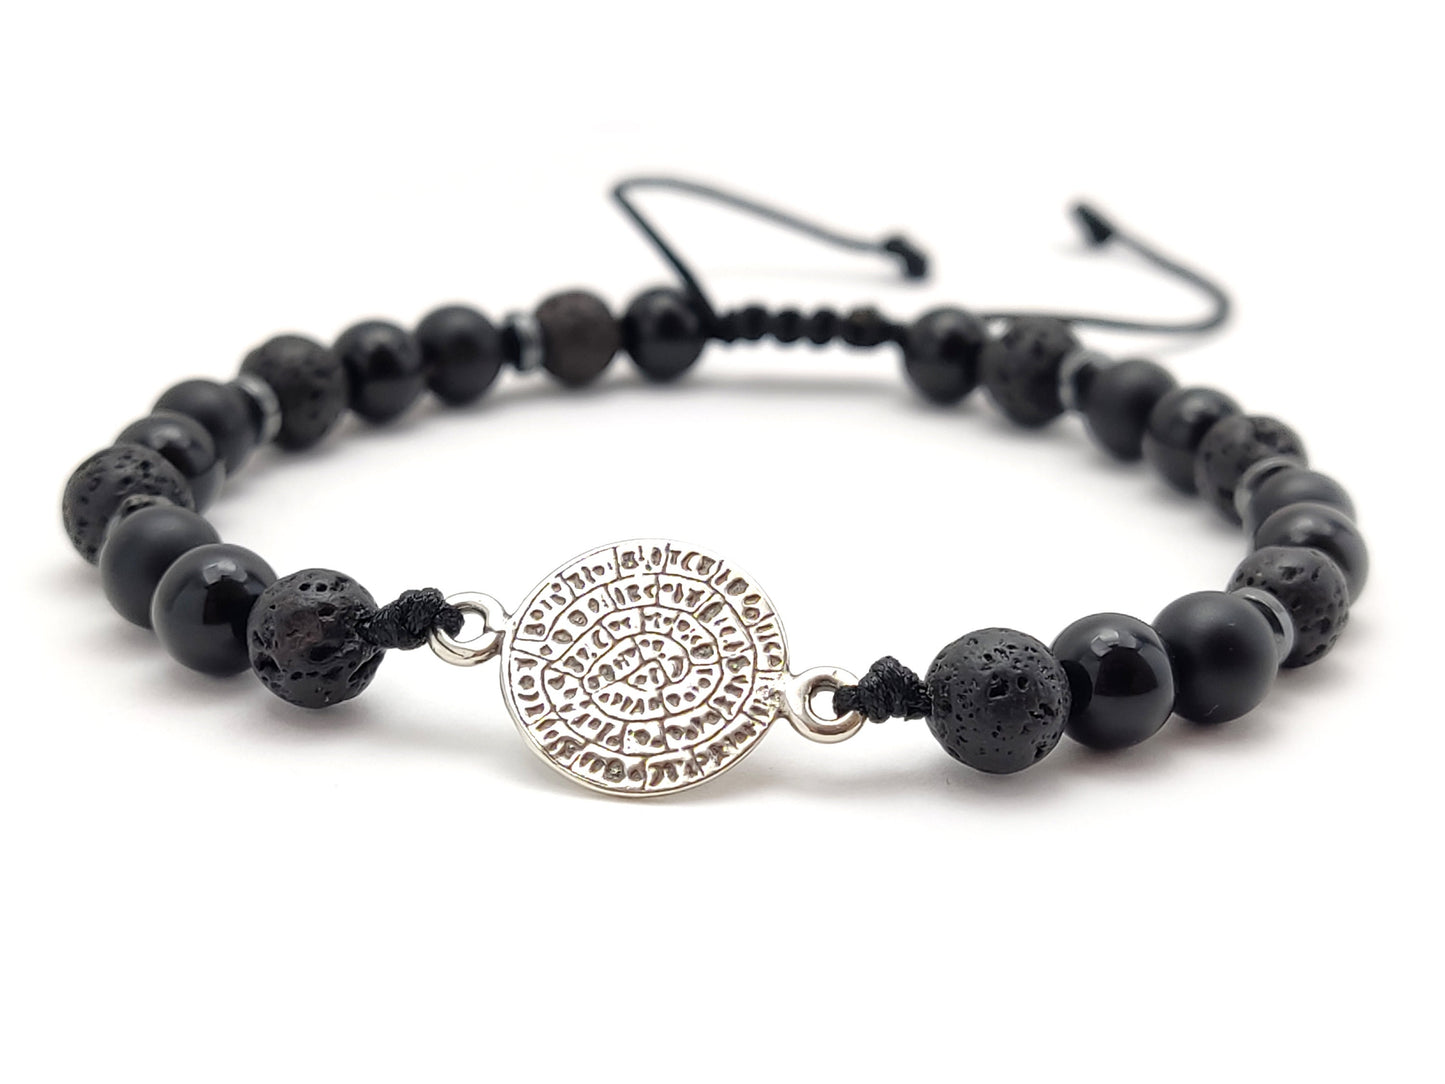 Sterling Silver 925 Phaistos Disc Bracelet Made With Lava And Onyx Stones, Volcanic Lava From Santorini Greece, Bijoux De Grece,